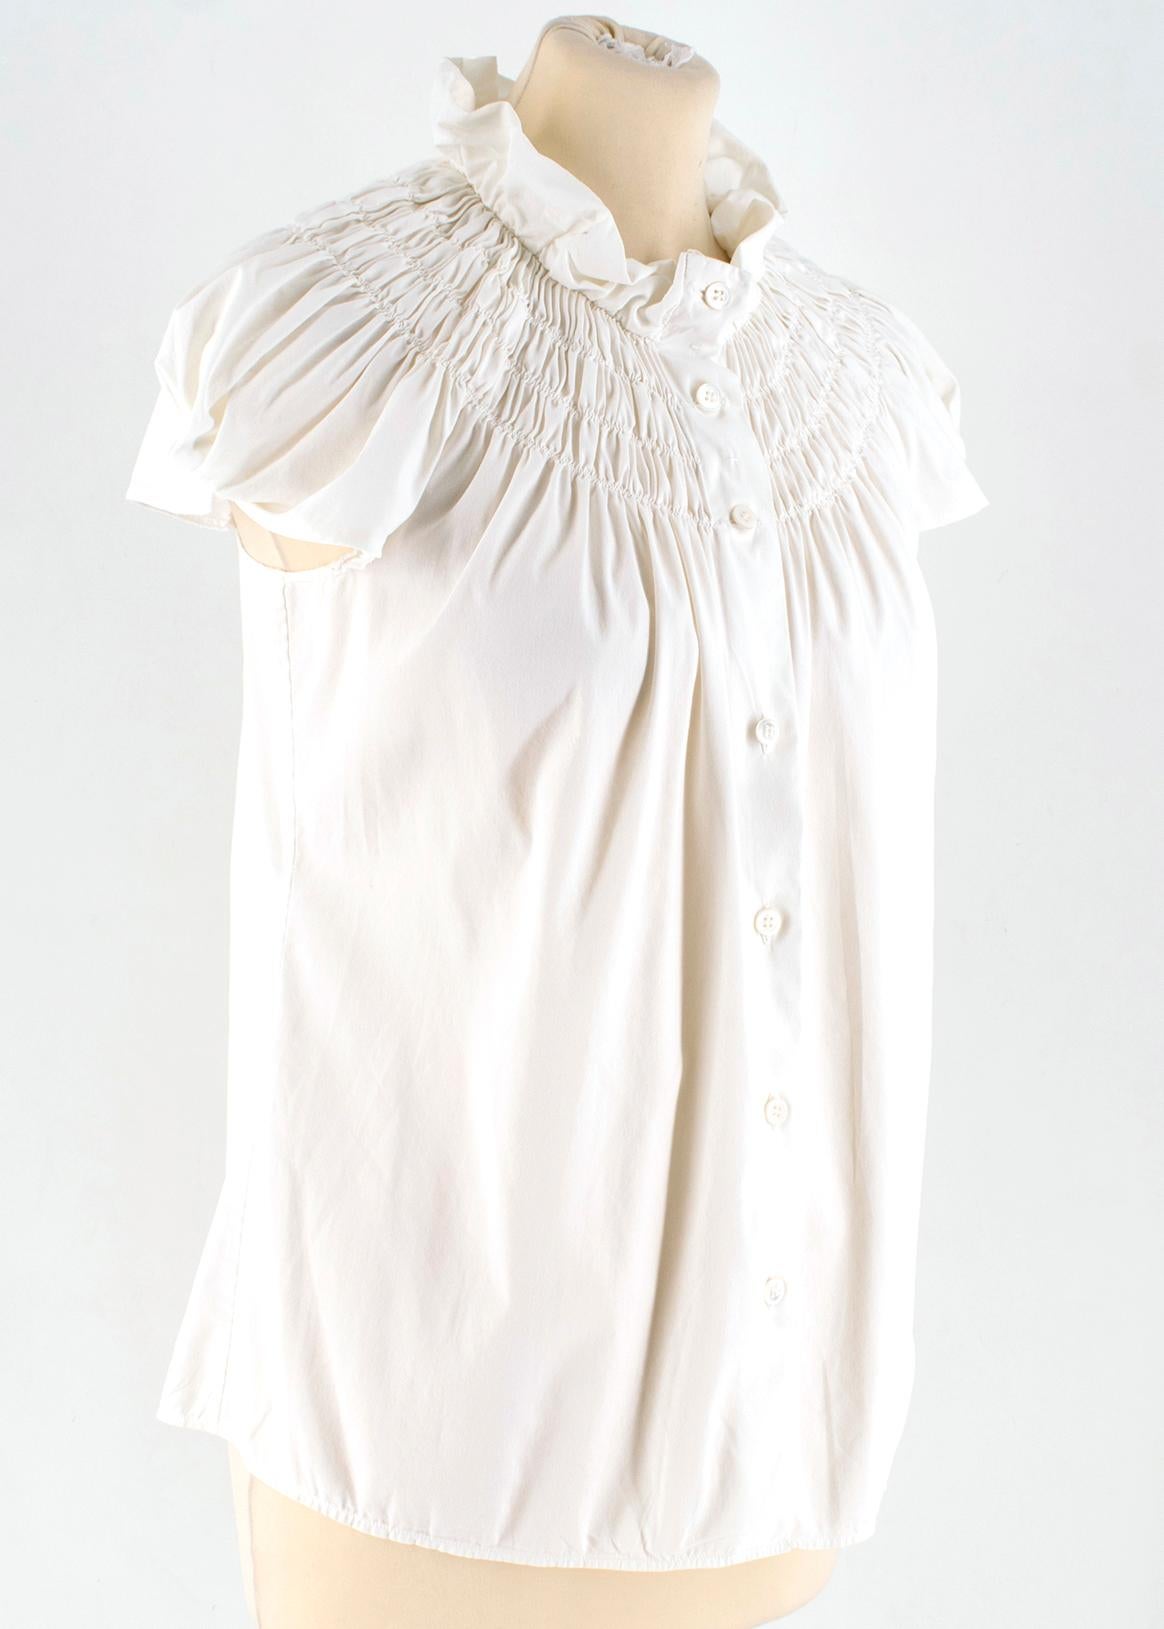 Prada White Smocked-Neck Blouse

- Off-white, poplin
- Ruffled stand collar, capped sleeves 
- Smocked neckline 
- Centre-front button fastening

Please note, these items are pre-owned and may show some signs of storage, even when unworn and unused.